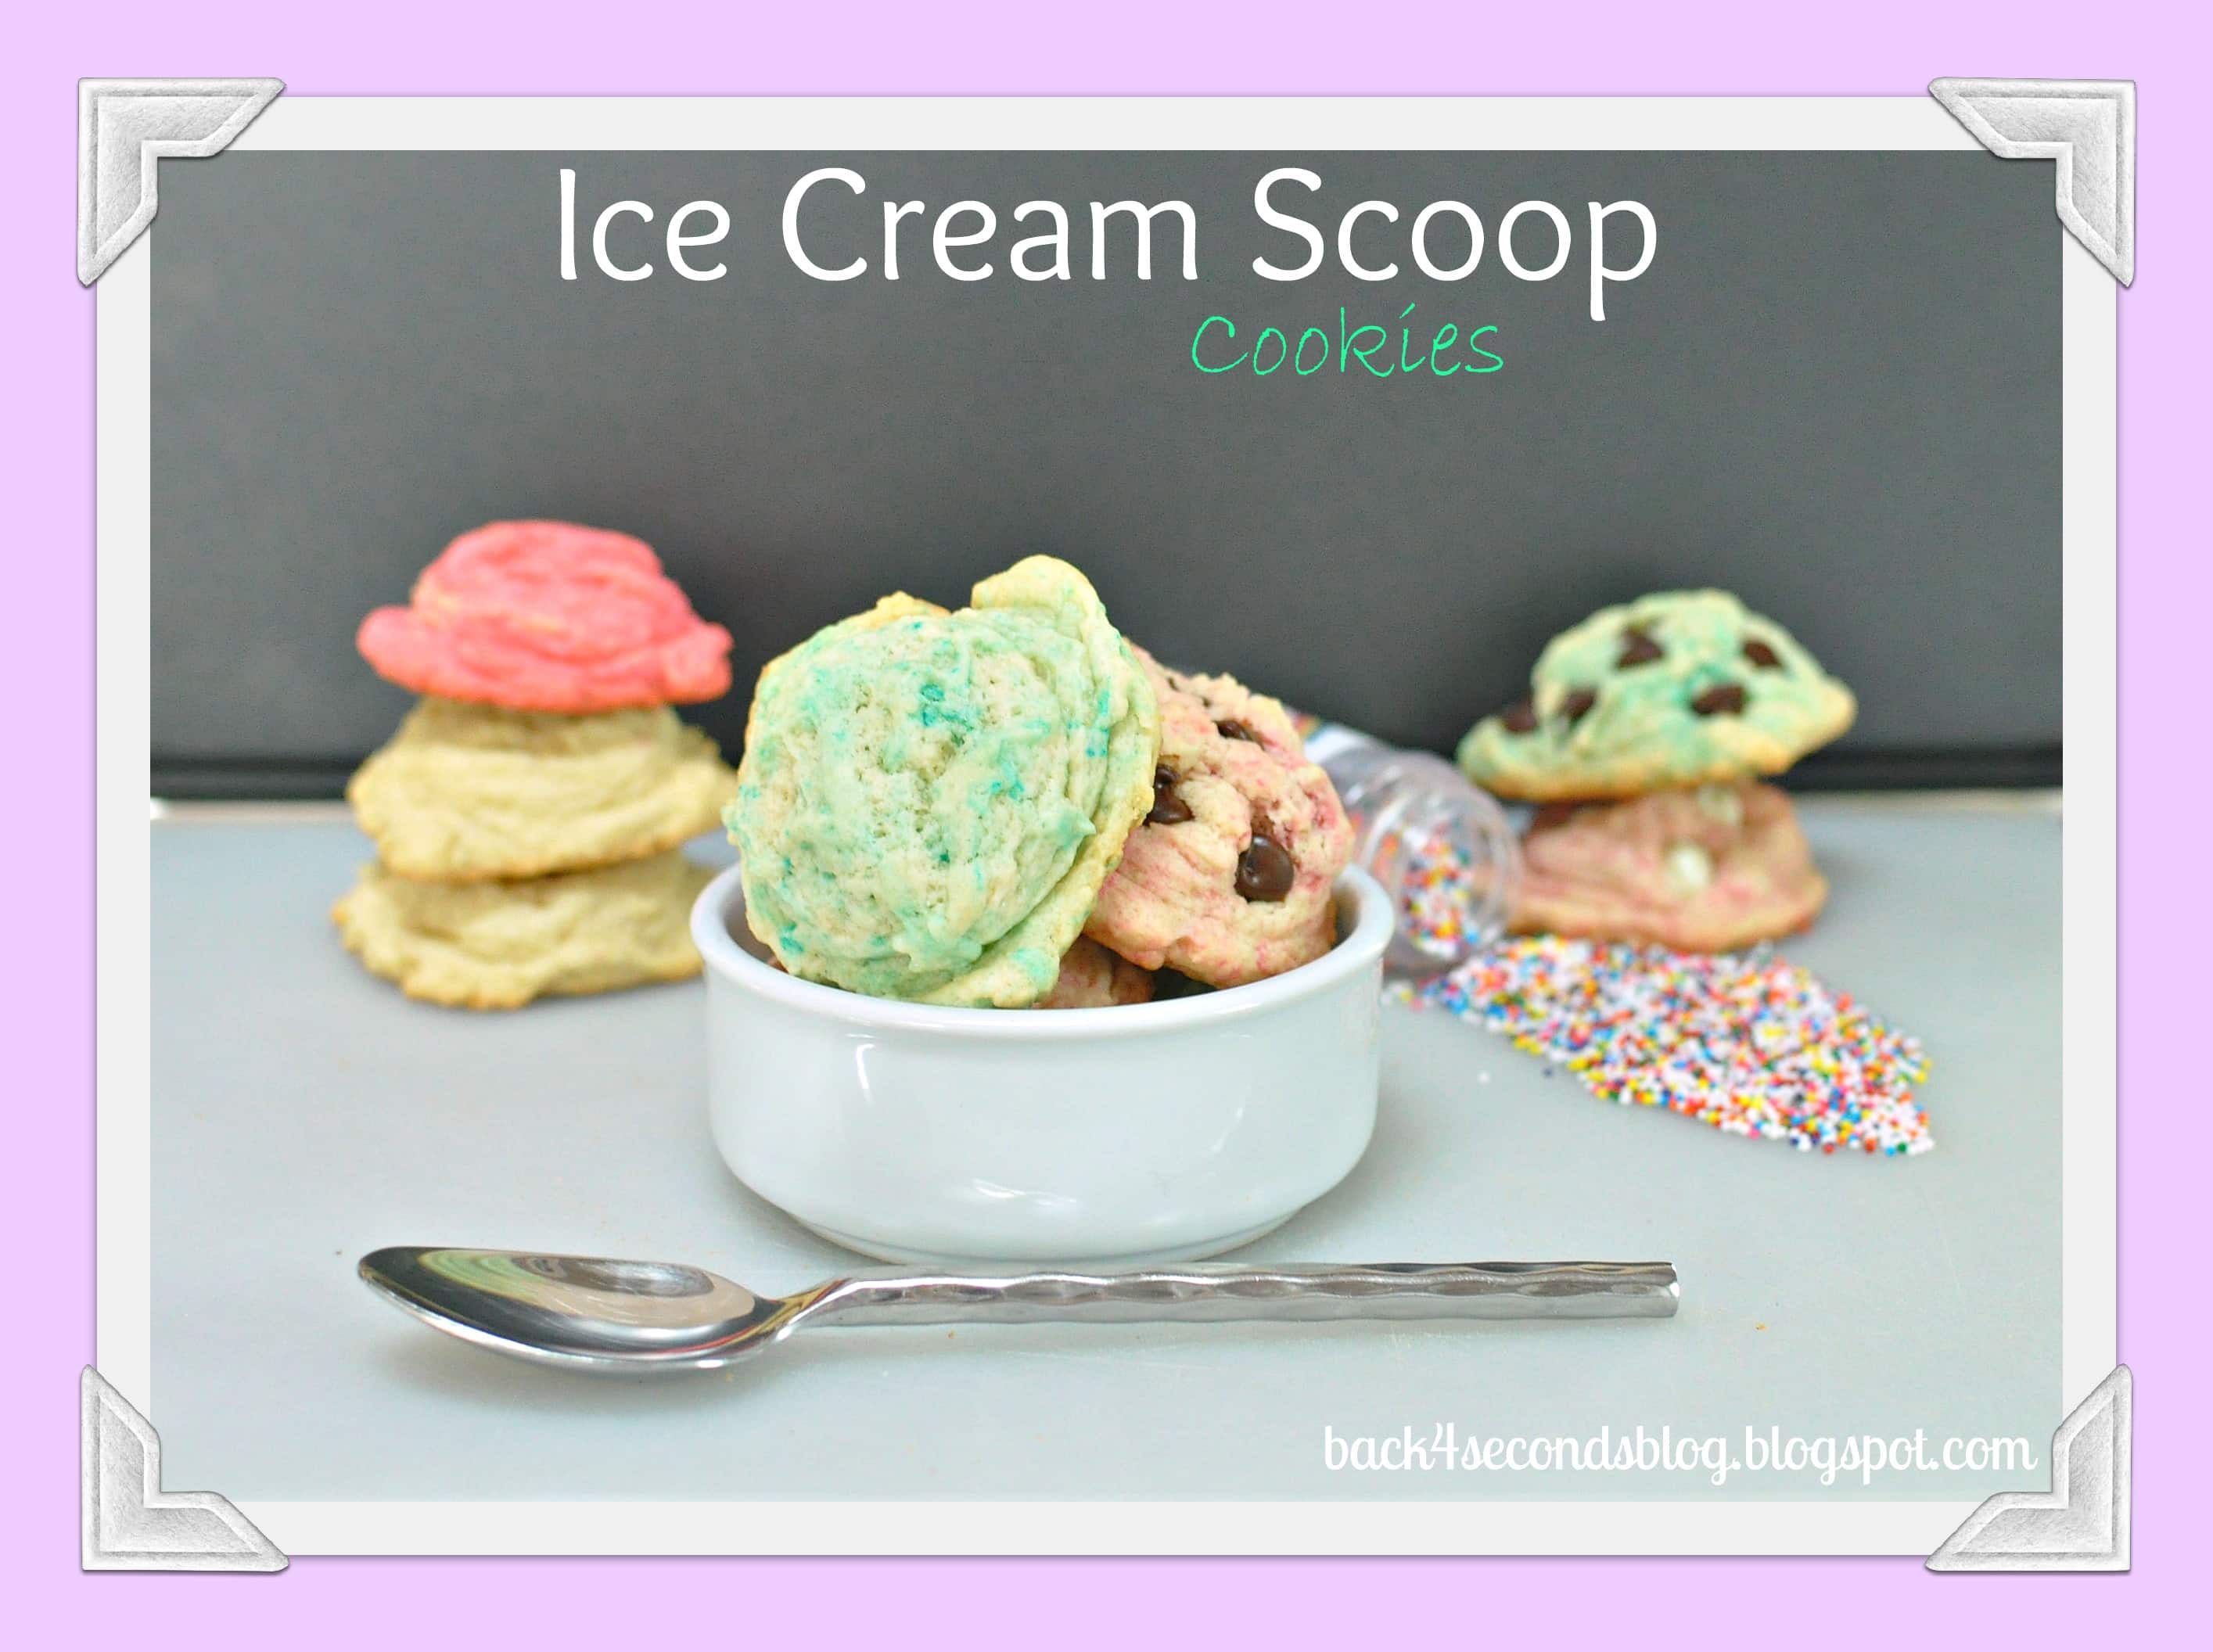 Ice Cream Scoop Cookies - Fabulous Foodie Fake Outs! - Back for Seconds